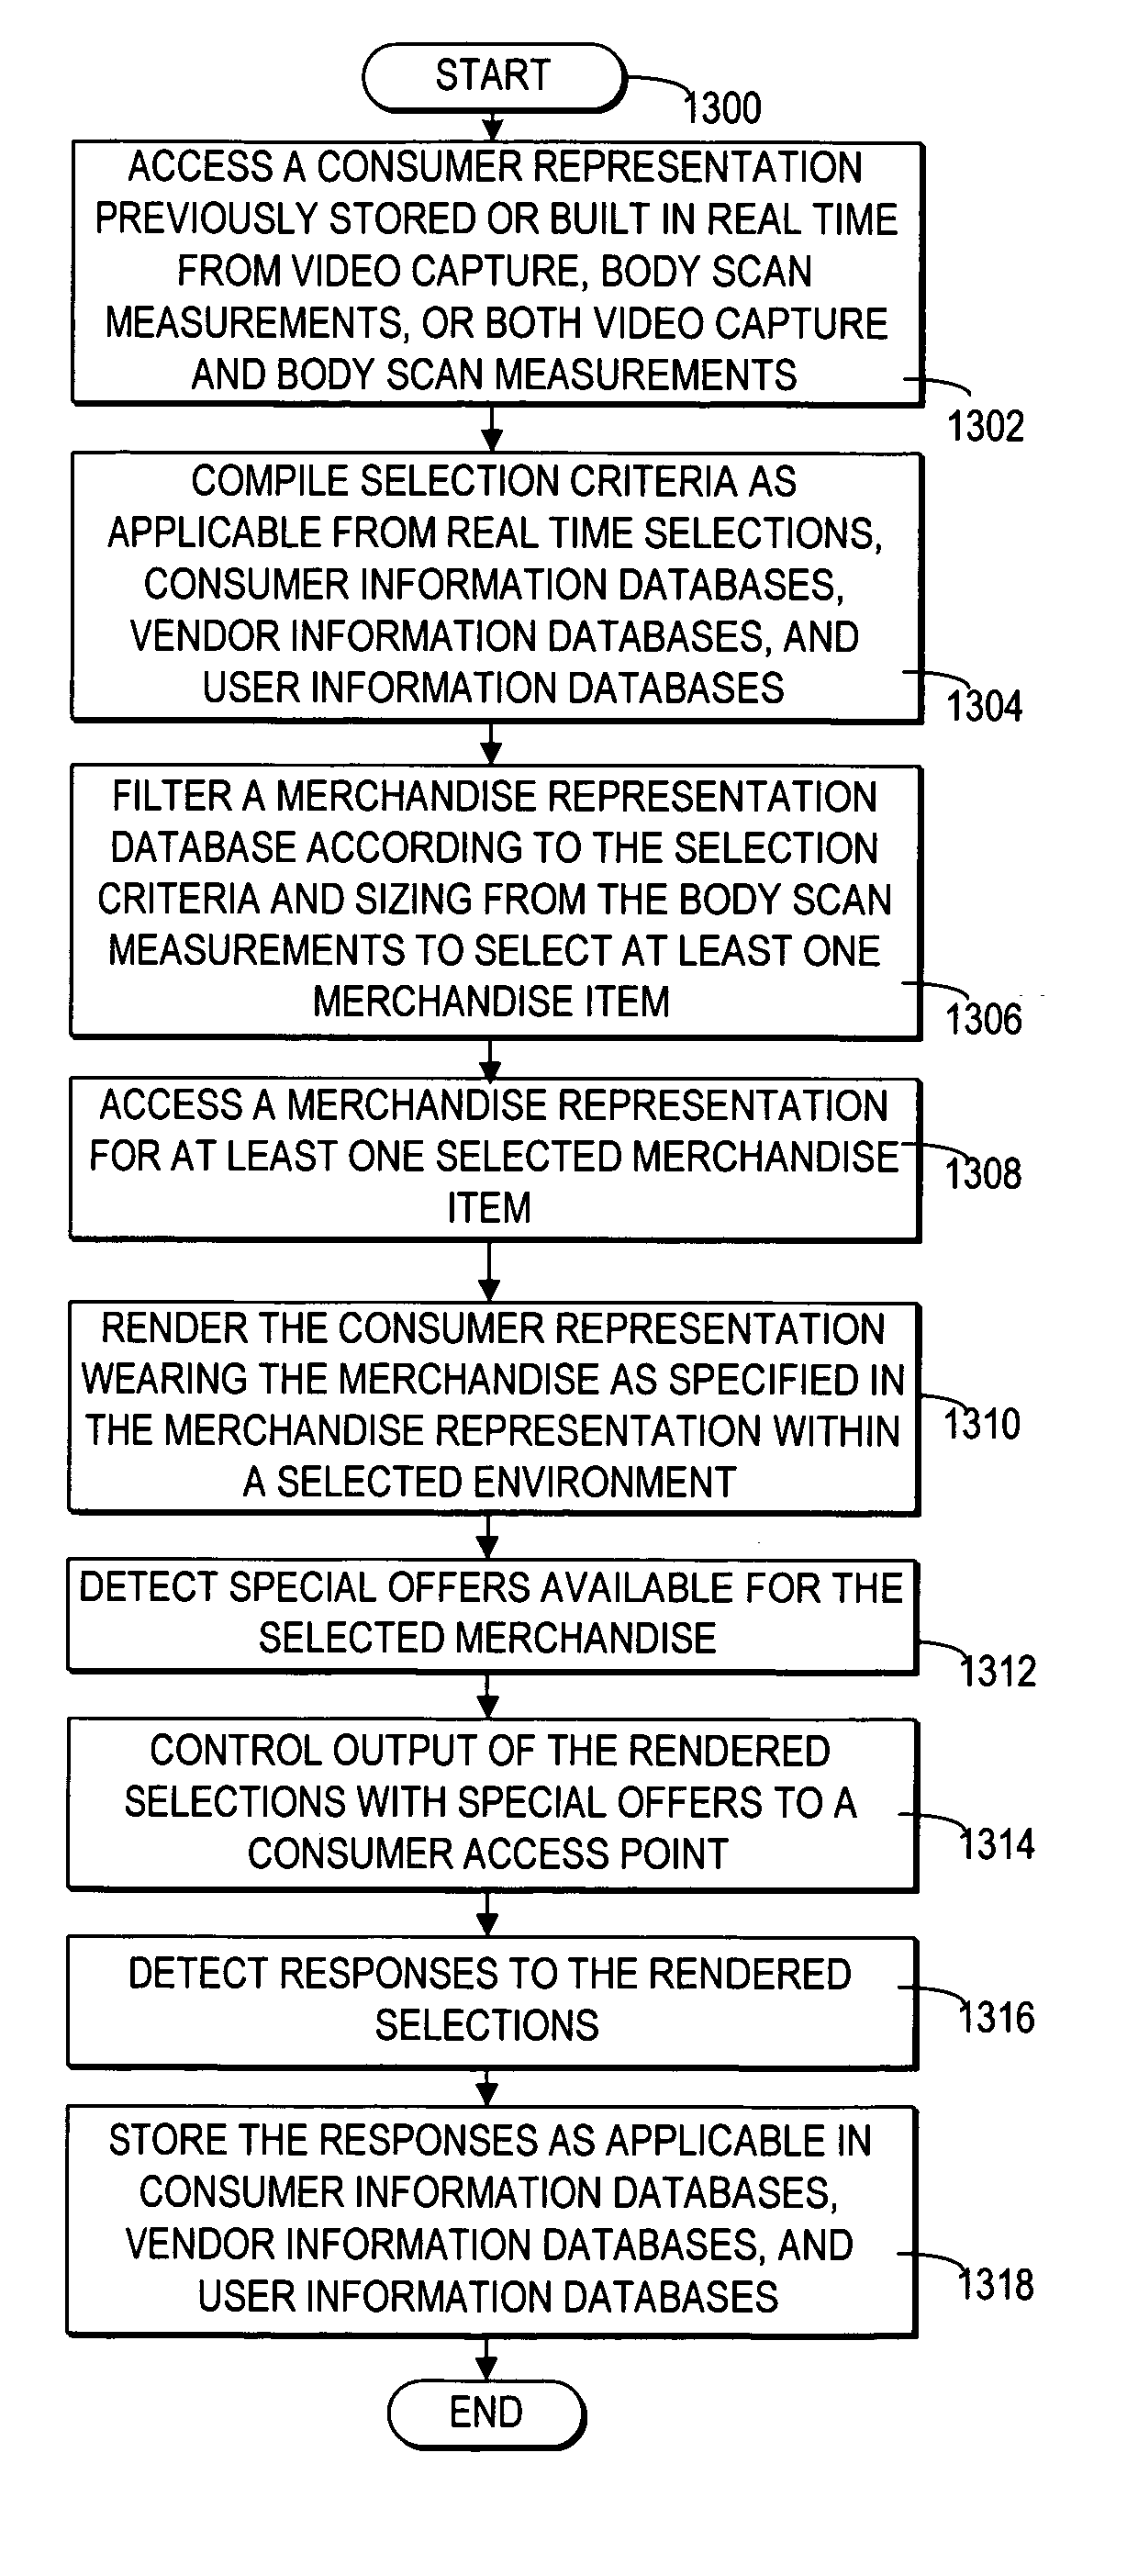 Consumer representation rendering with selected merchandise